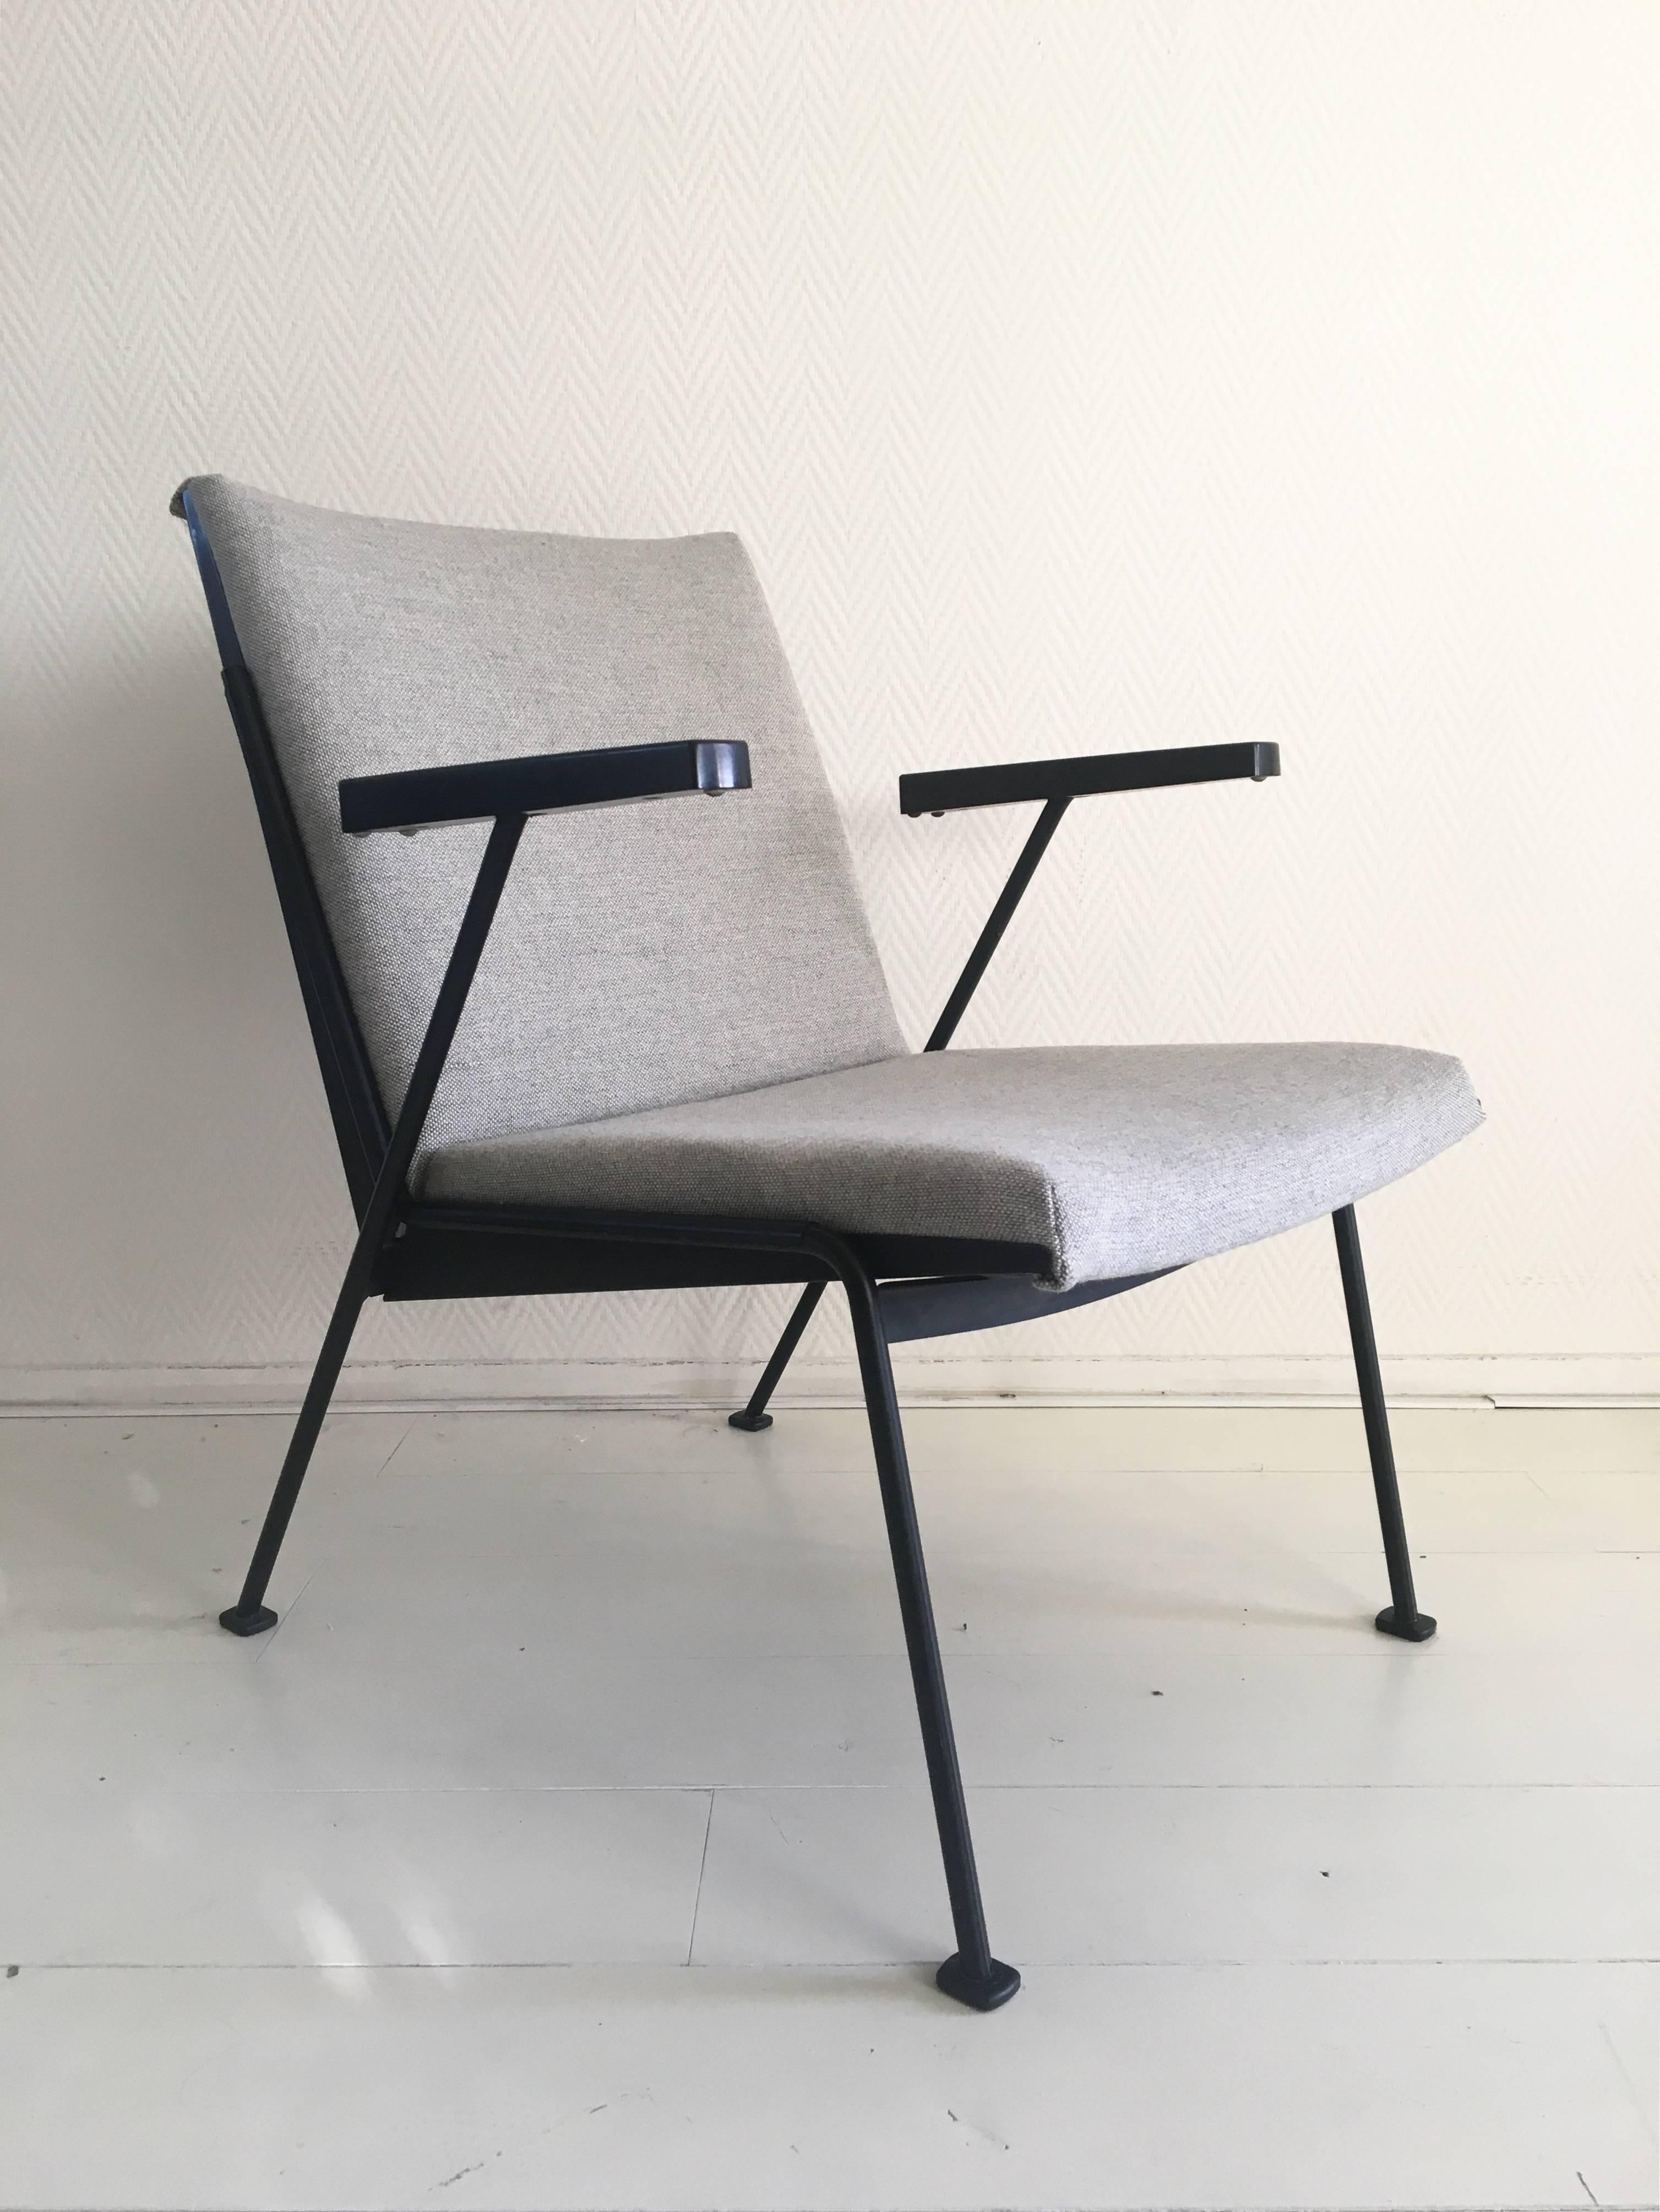 Black and white oase lounge chairs designed by Wim Rietveld for Ahrend de Cirkel, Netherlands, circa 1950s.
The chairs that feature an enameled metal base and Bakelite armrests, are completely new upholstered with new foam and Kvadrat fabric.